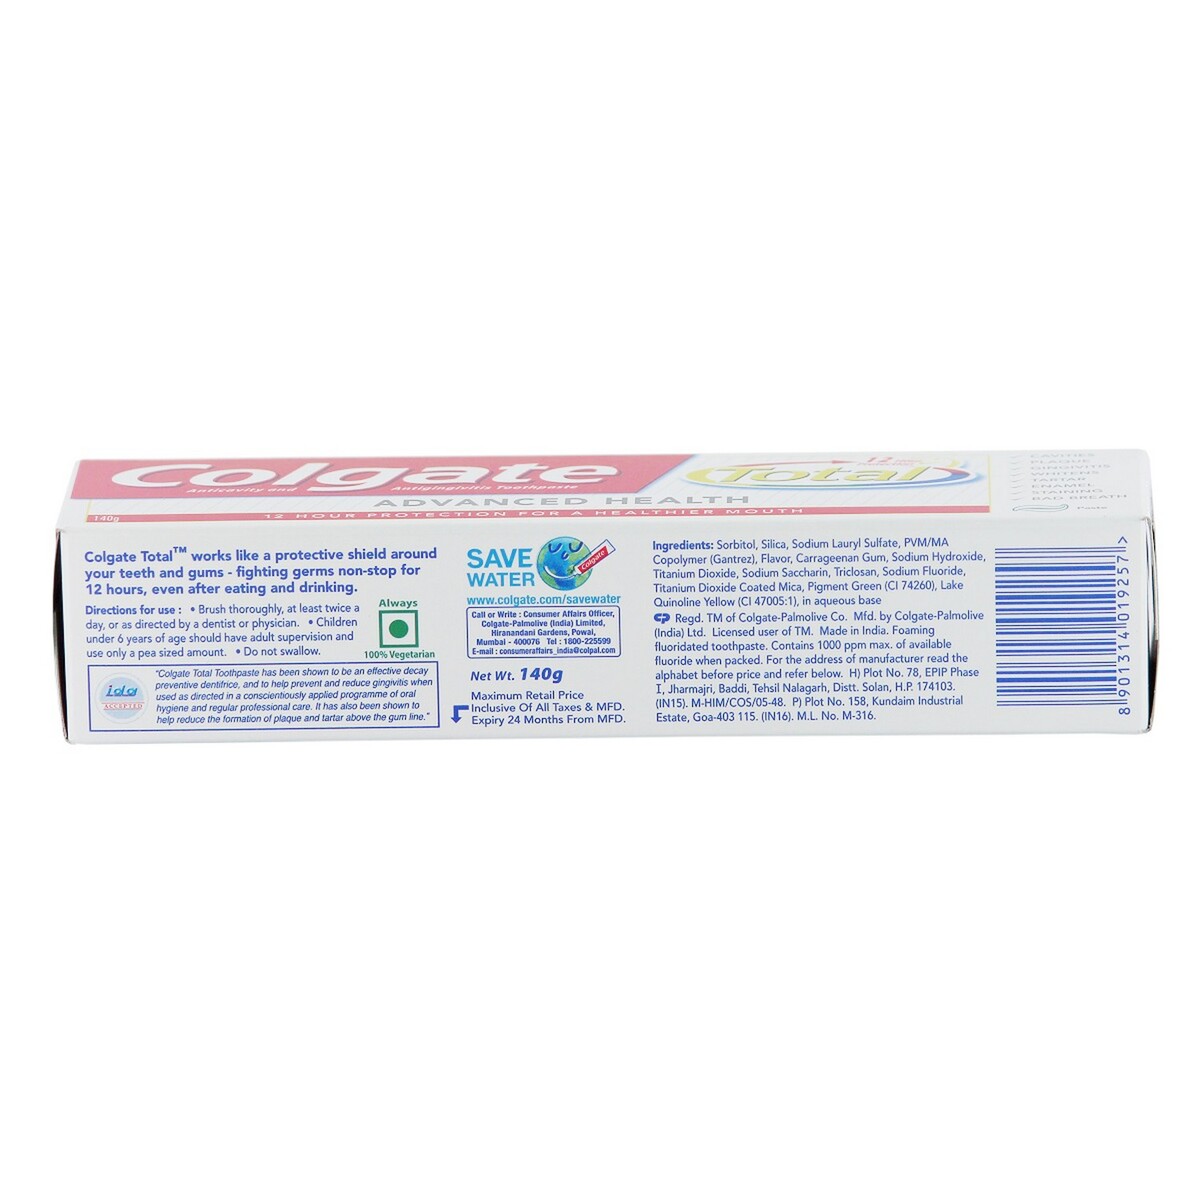 Colgate Tooth Paste Total 120g